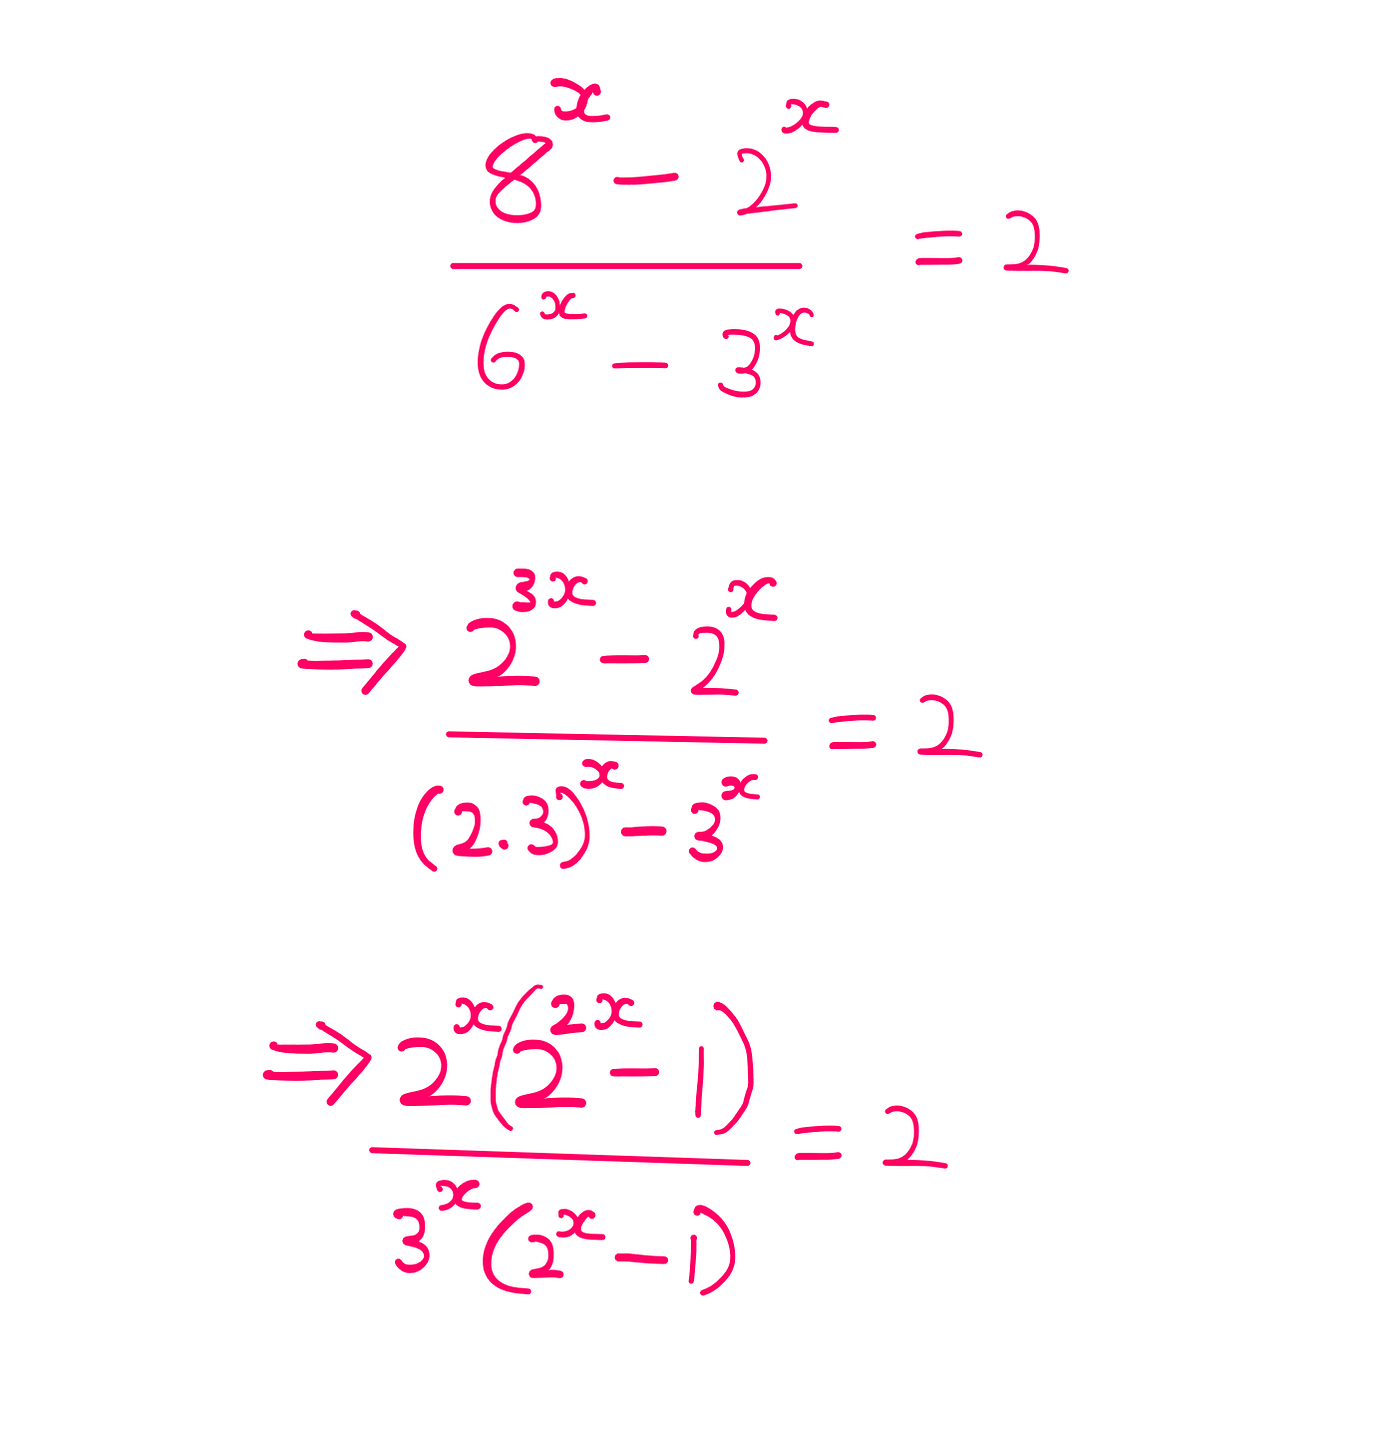 How To Really Solve This Tricky Algebra Problem? (II) — (8^x — 2^x)/(6^x — 3^x) = 2; [2^(3x) — 2^x]/[(2*3)^x — 3^x] = 2; 2^x*(2^(2x)-1)/3^x*(2^x — 1) = 2